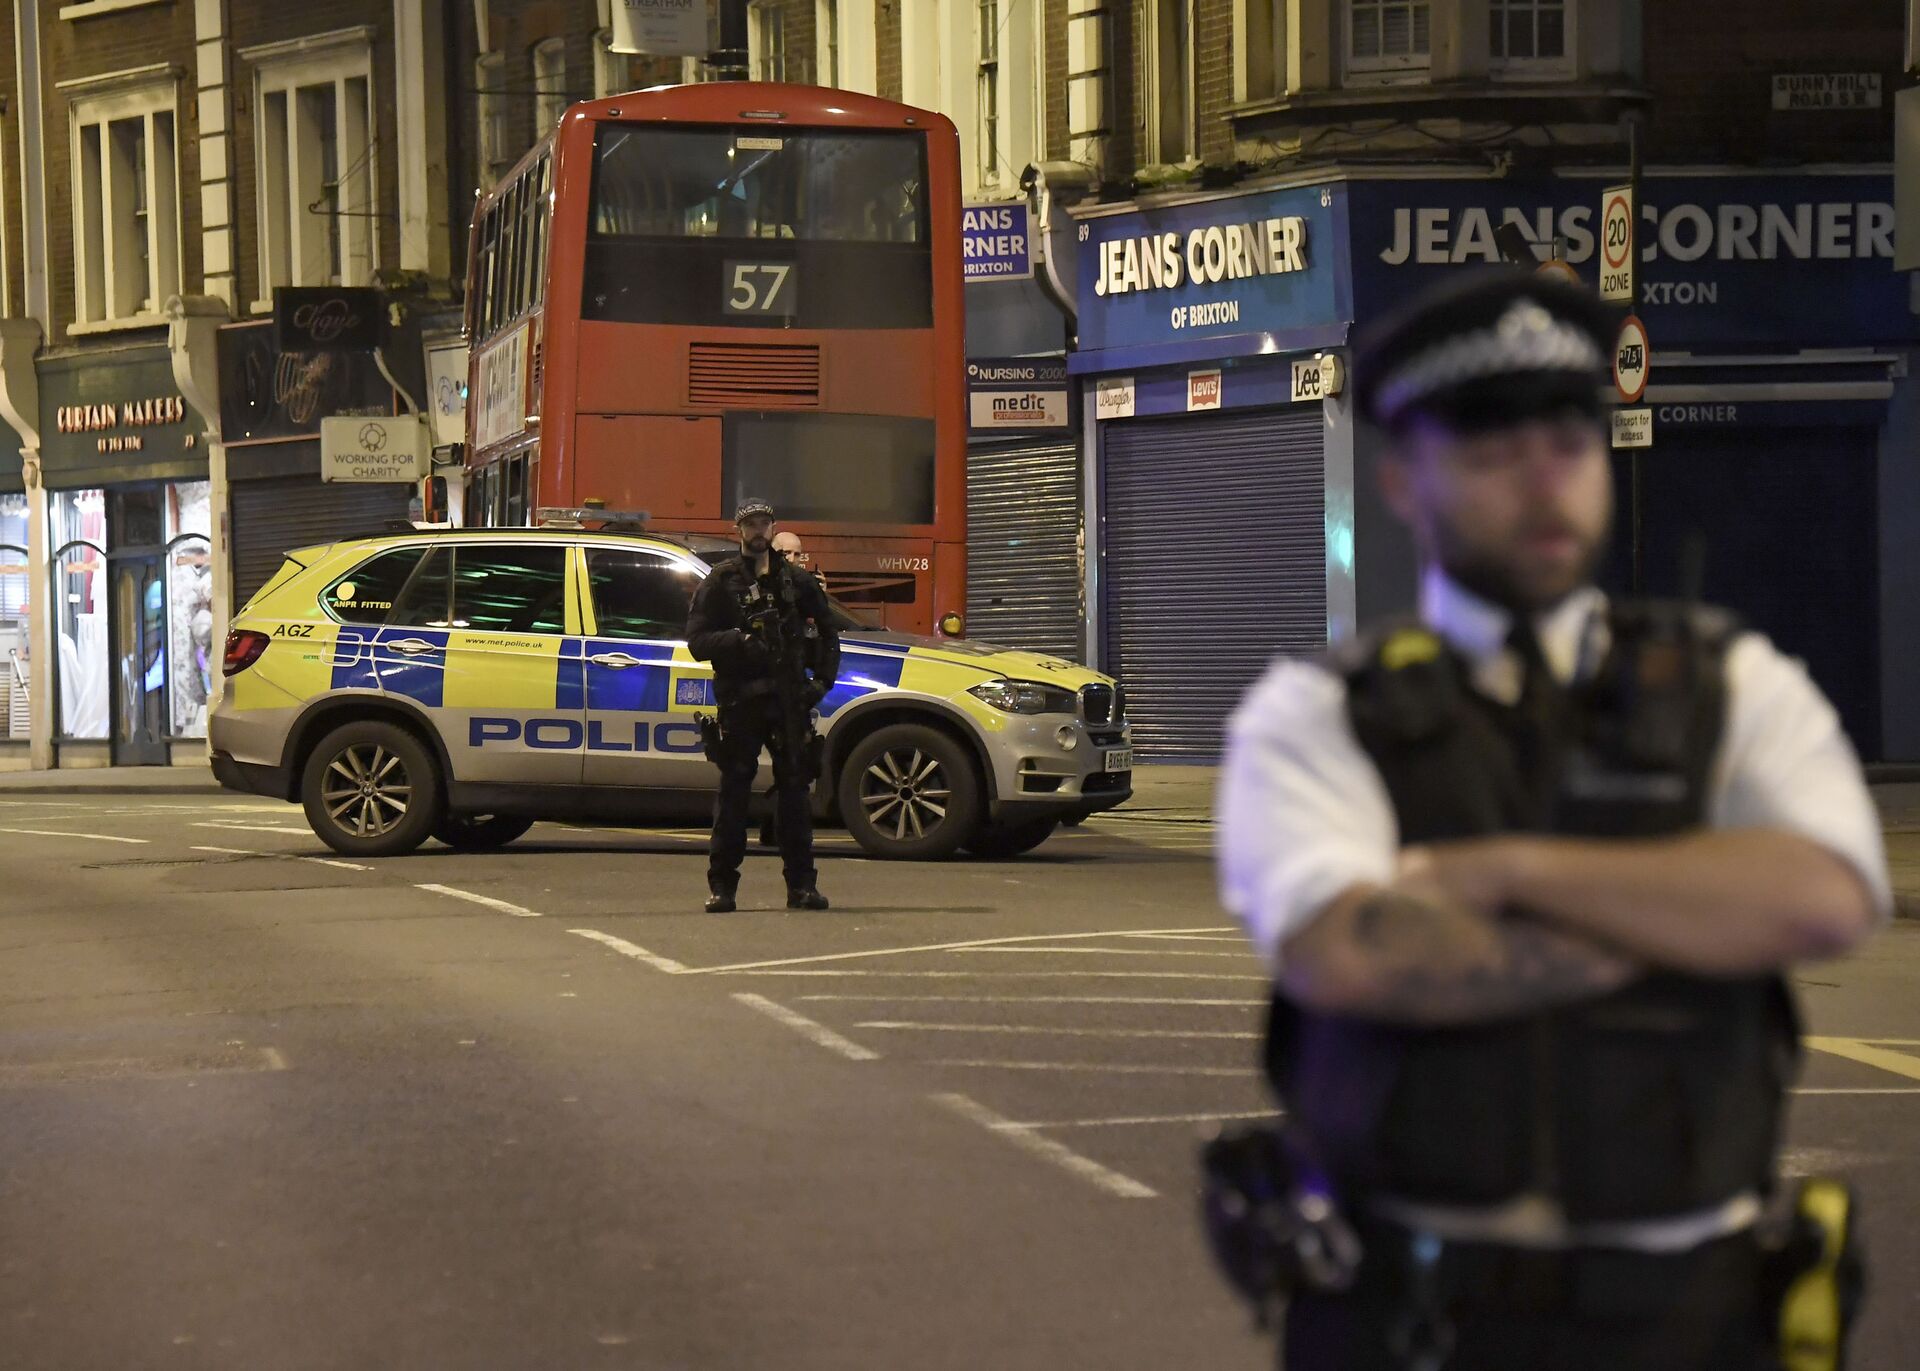 A police officer stands guard near the scene after a stabbing incident in Streatham London, England, Sunday, Feb. 2, 2020 - Sputnik International, 1920, 07.09.2021